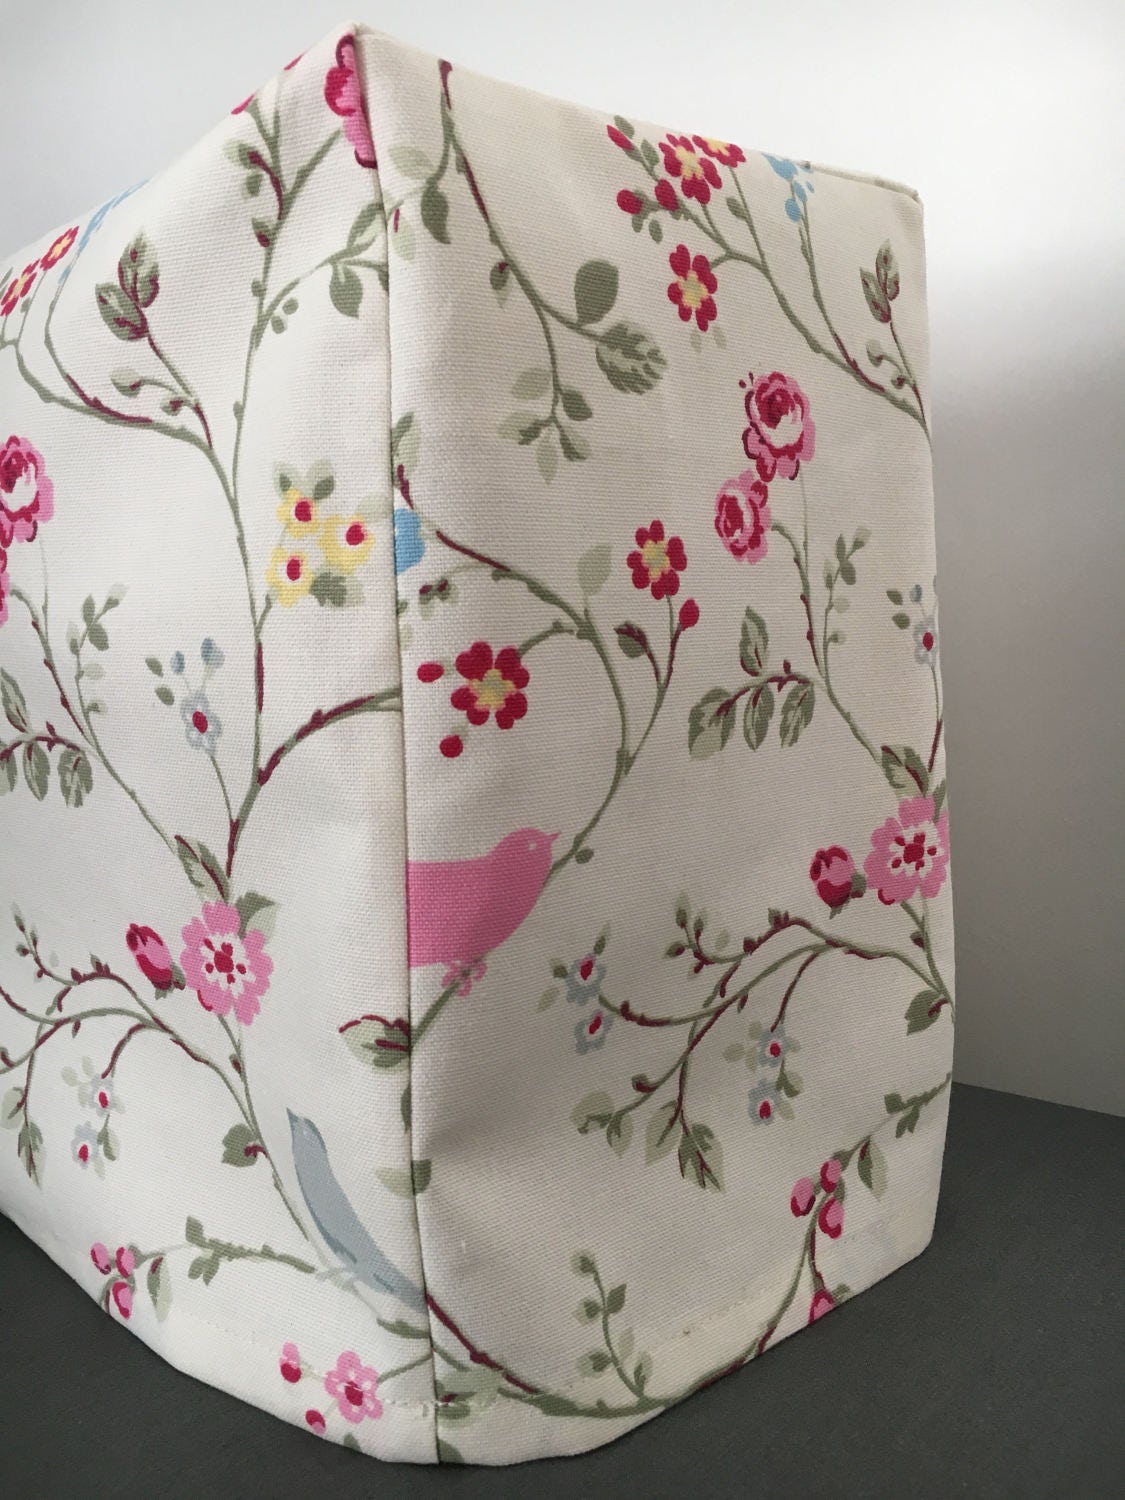 Bird Trail Fabric Shabby Chic Sewing Machine Cover/dust Cover 